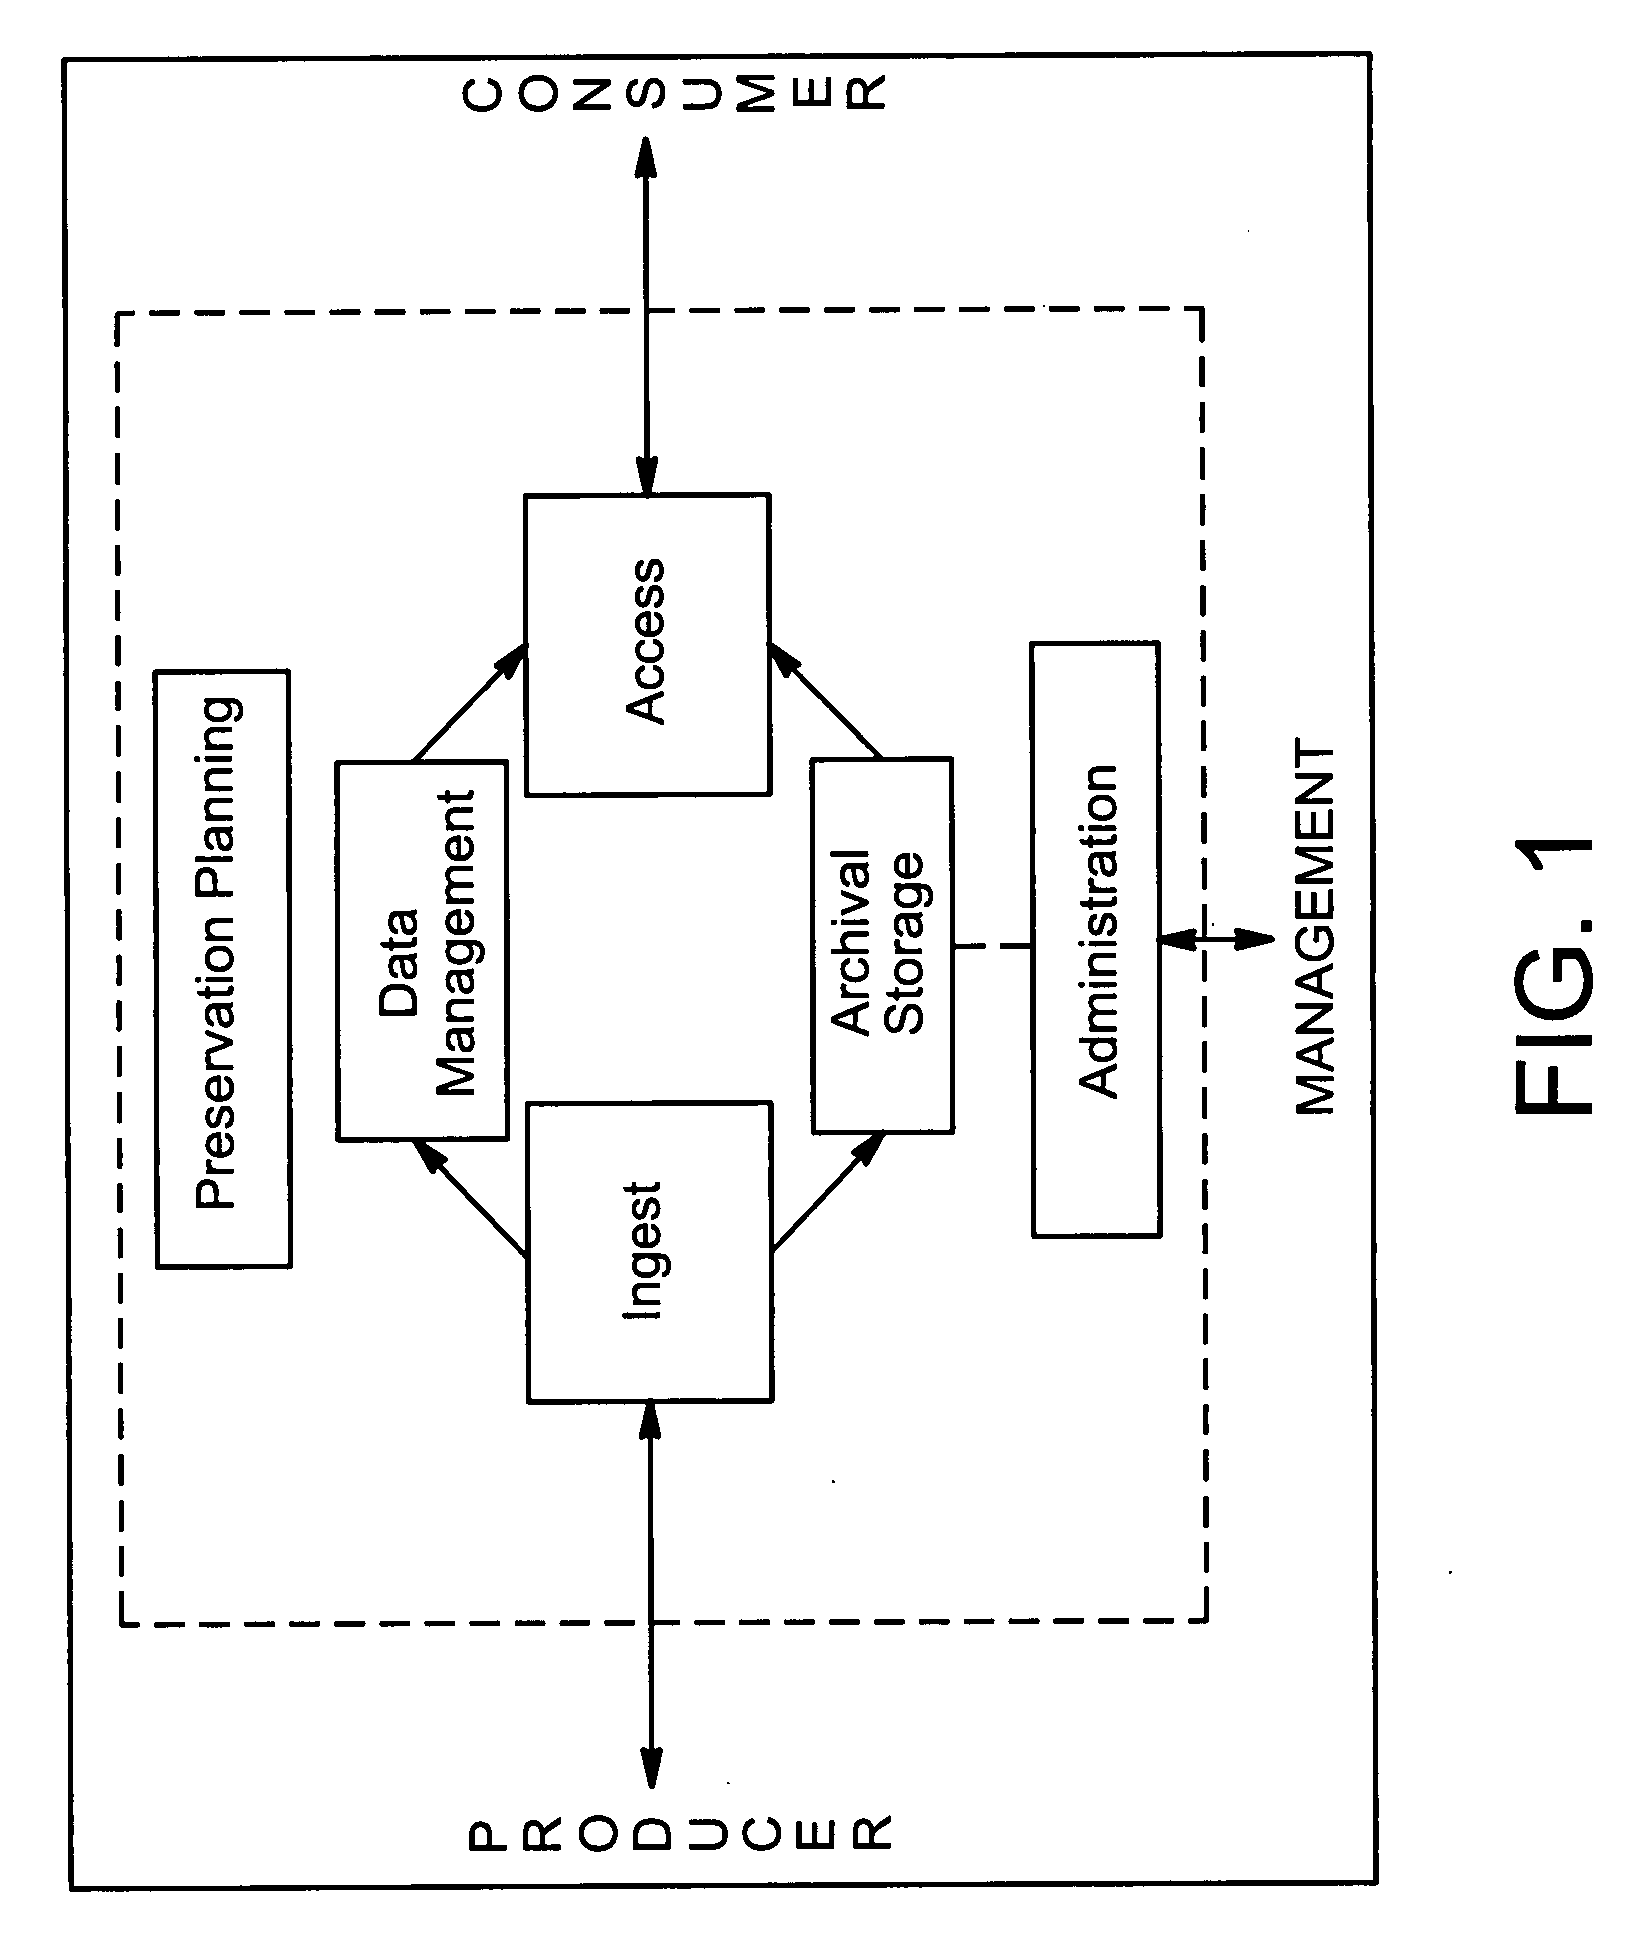 System and method for immutably storing electronic assets in a large-scale computer system